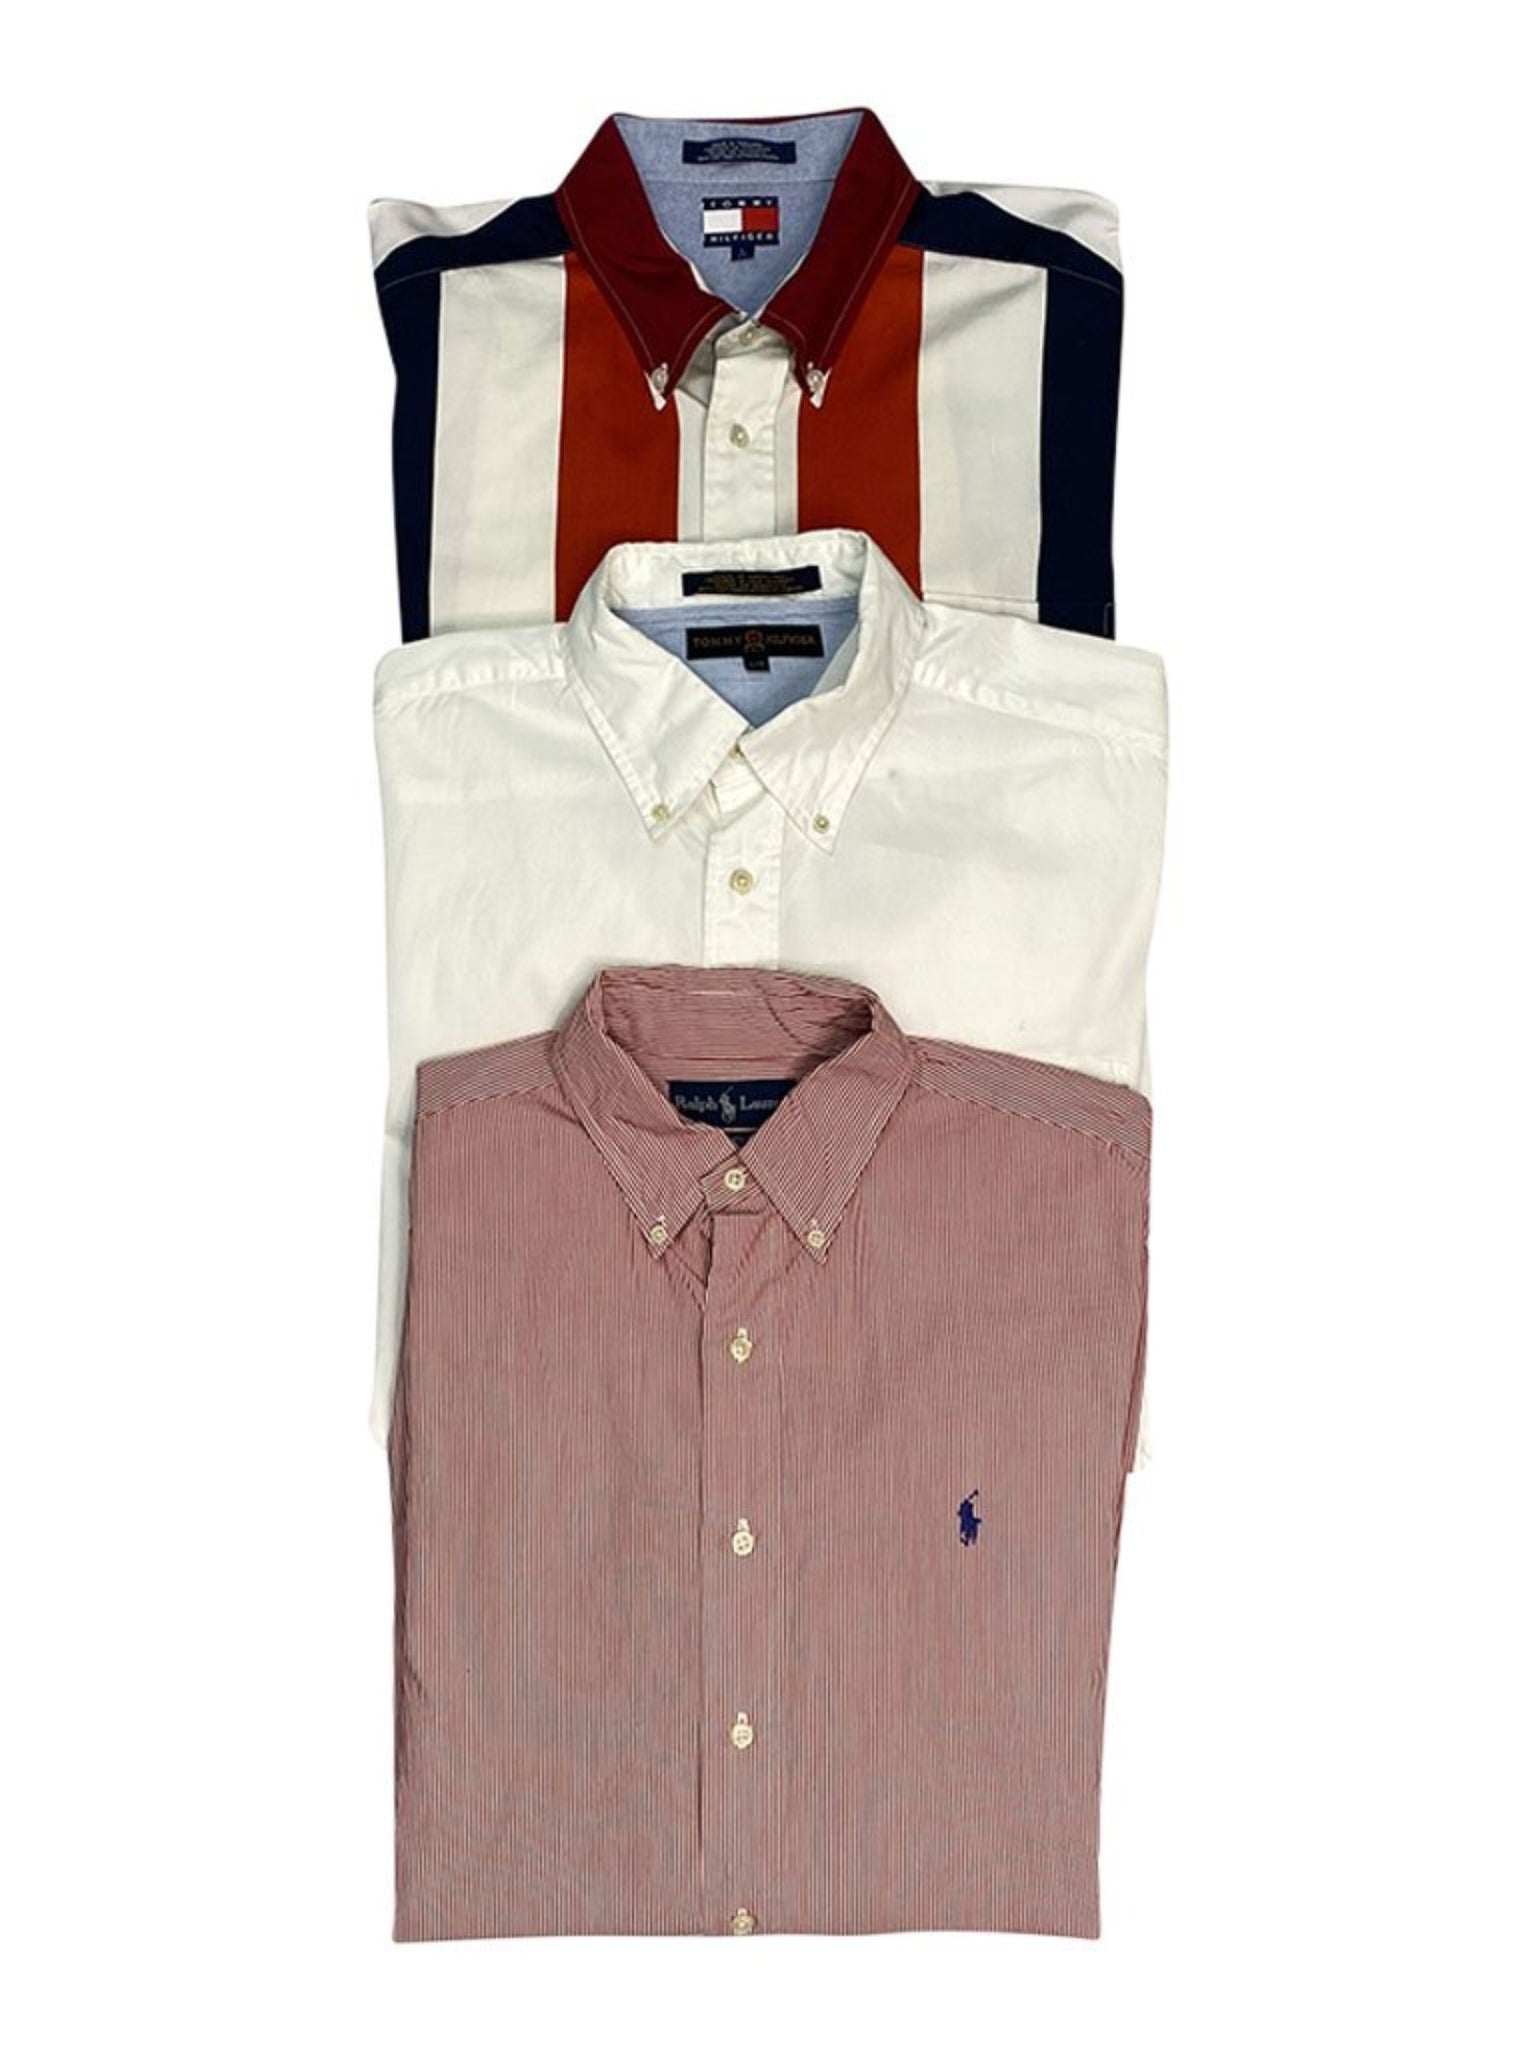 Vintage Ralph and Tommy Hilfiger Shirts Bundle – American Recycled Clothing Wholesale